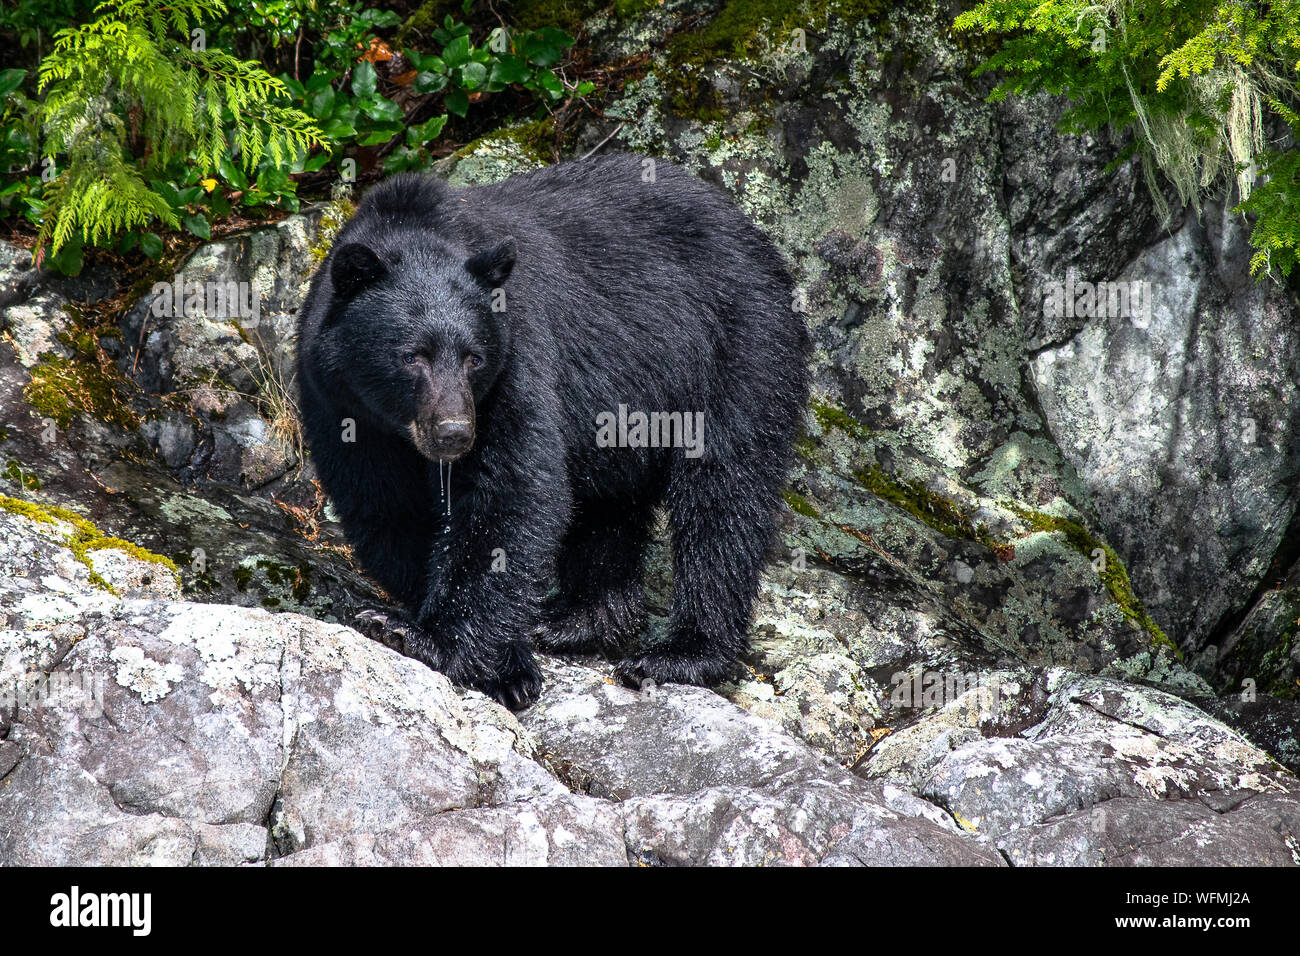 A large black bear patrols a beach on a rocky island near Tofino, BC, Canada.  Coastal bears are easily viewed by visitors on boat tours year round. Stock Photo